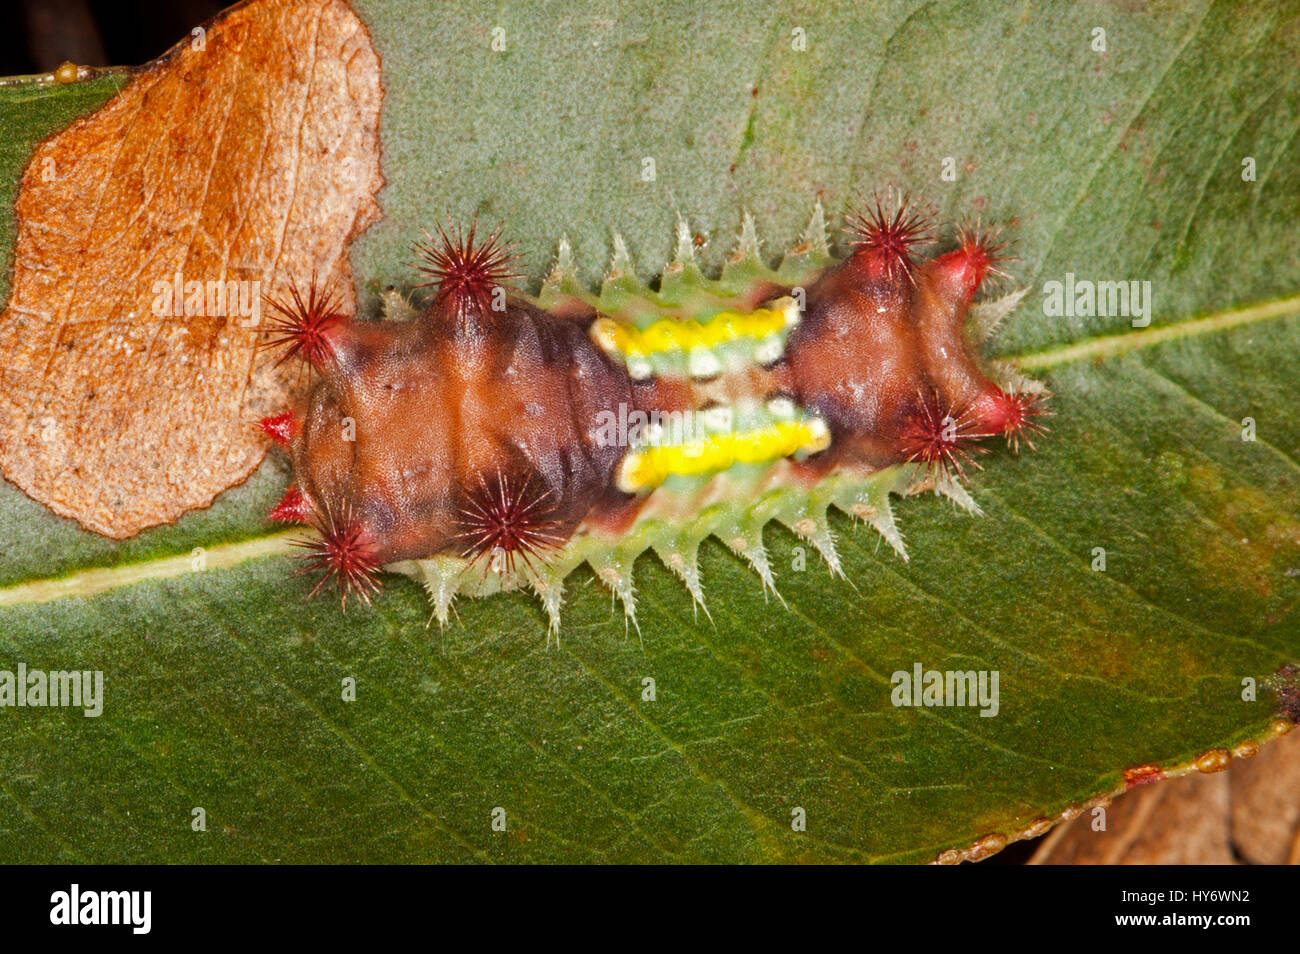 Unusual and colourful caterpillar of Australian mottled cup moth Doratifera vulnerans, with stinging red spines clearly visible, on green leaf Stock Photo